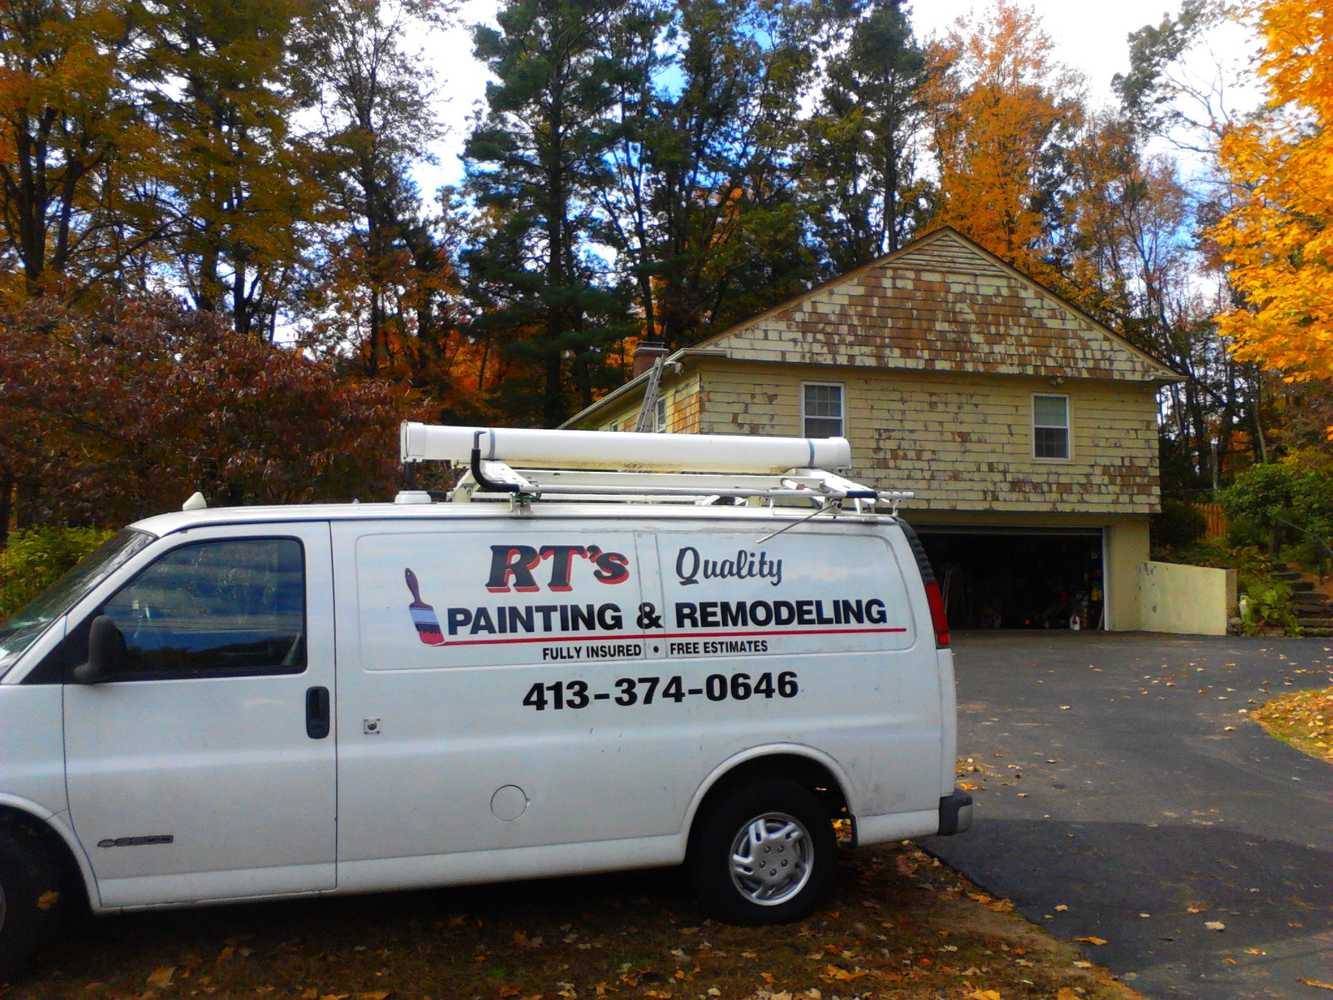 RT'S PAINTING & REMODELING 